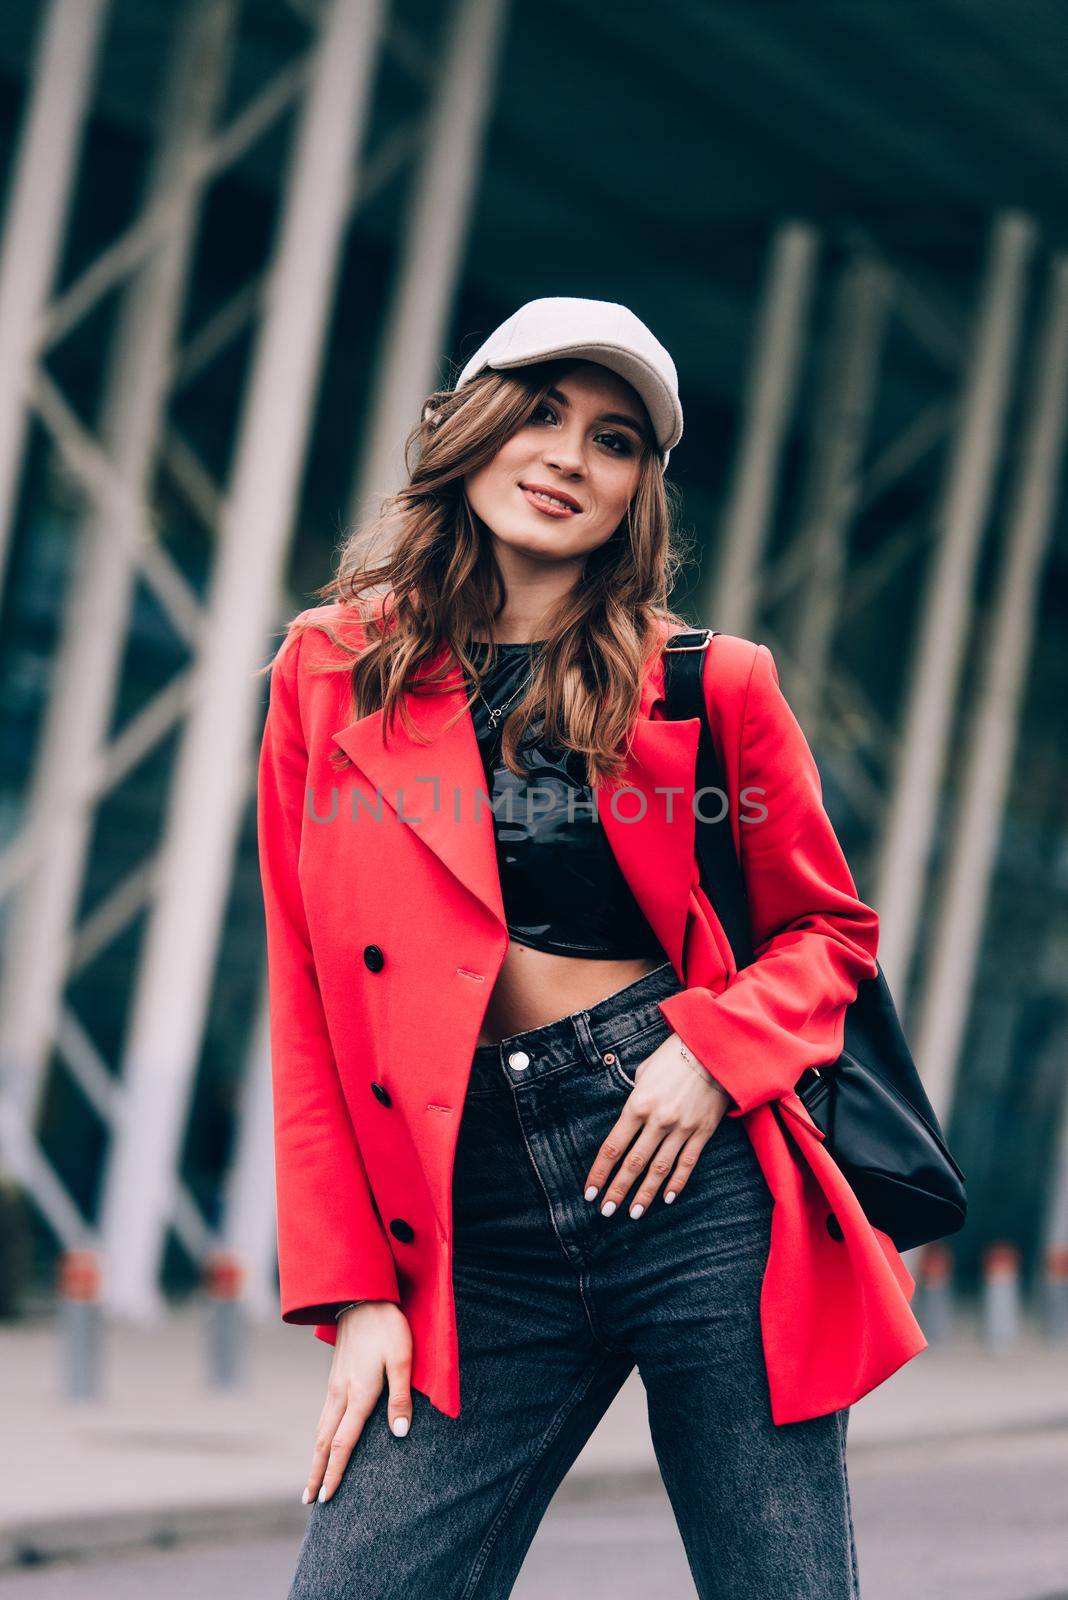 glamour woman in trendy outfit posing against the building urban background, fashion look. Outdoor fashion portrait of stylish young woman by Ashtray25